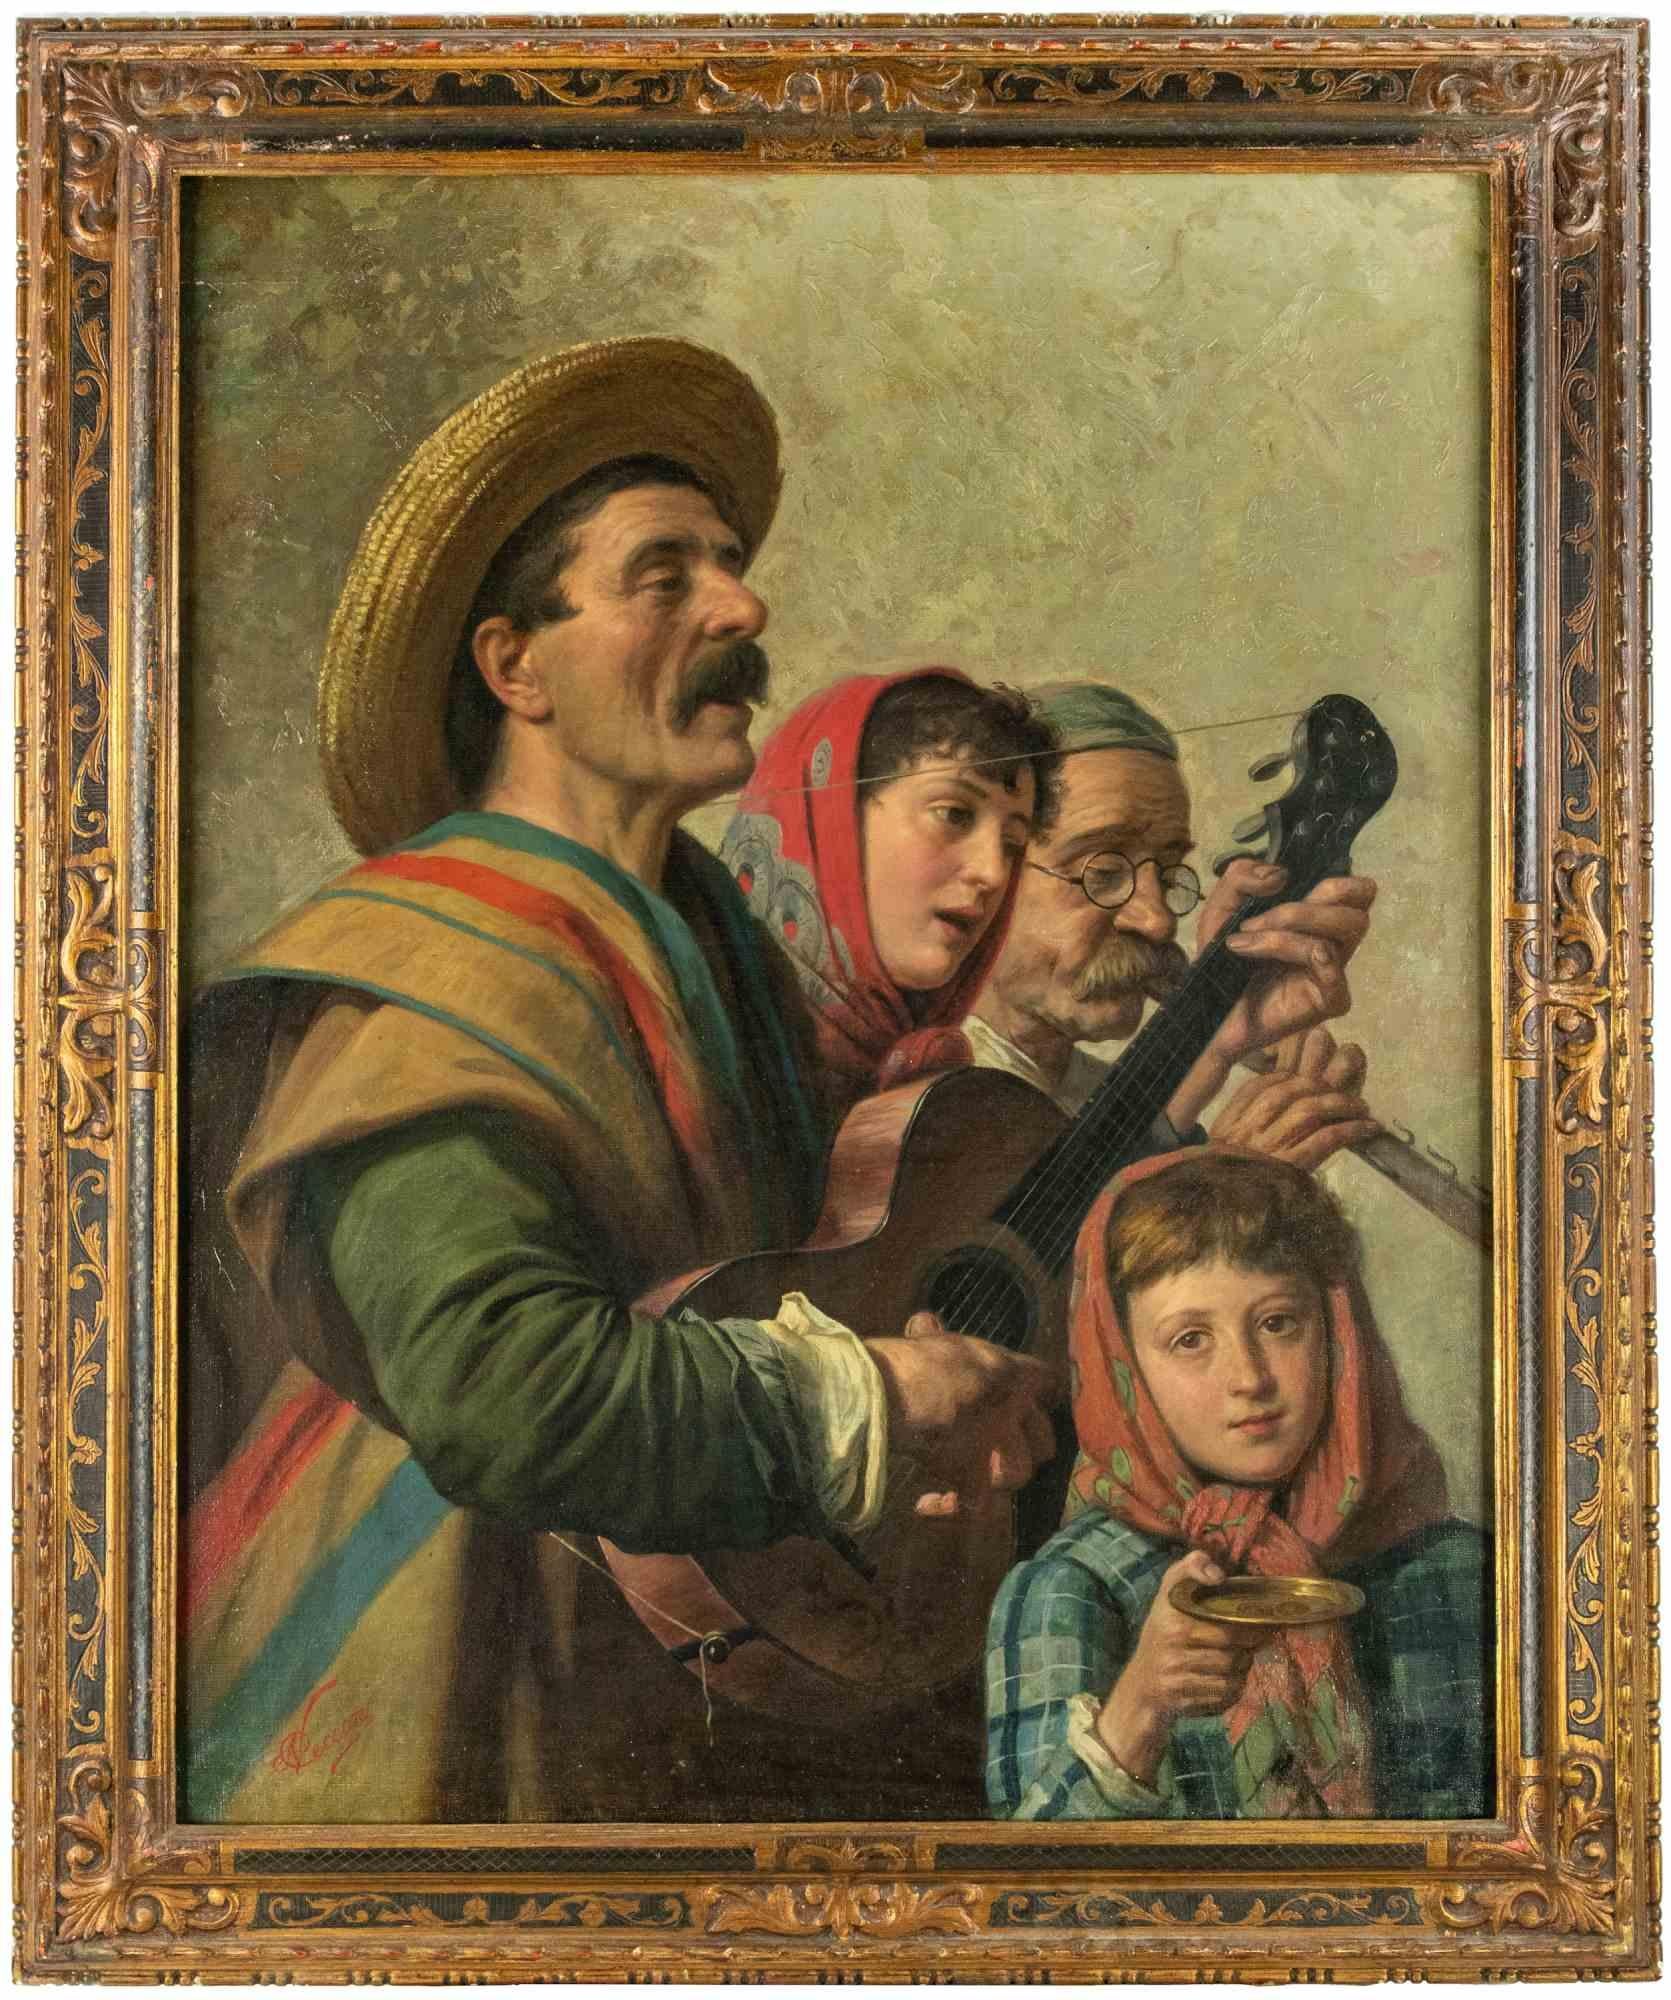 Niccolò Cecconi Portrait Painting - The Little Concert (Concertino) - Oil Paint by N. Cecconi - Late 19th Century